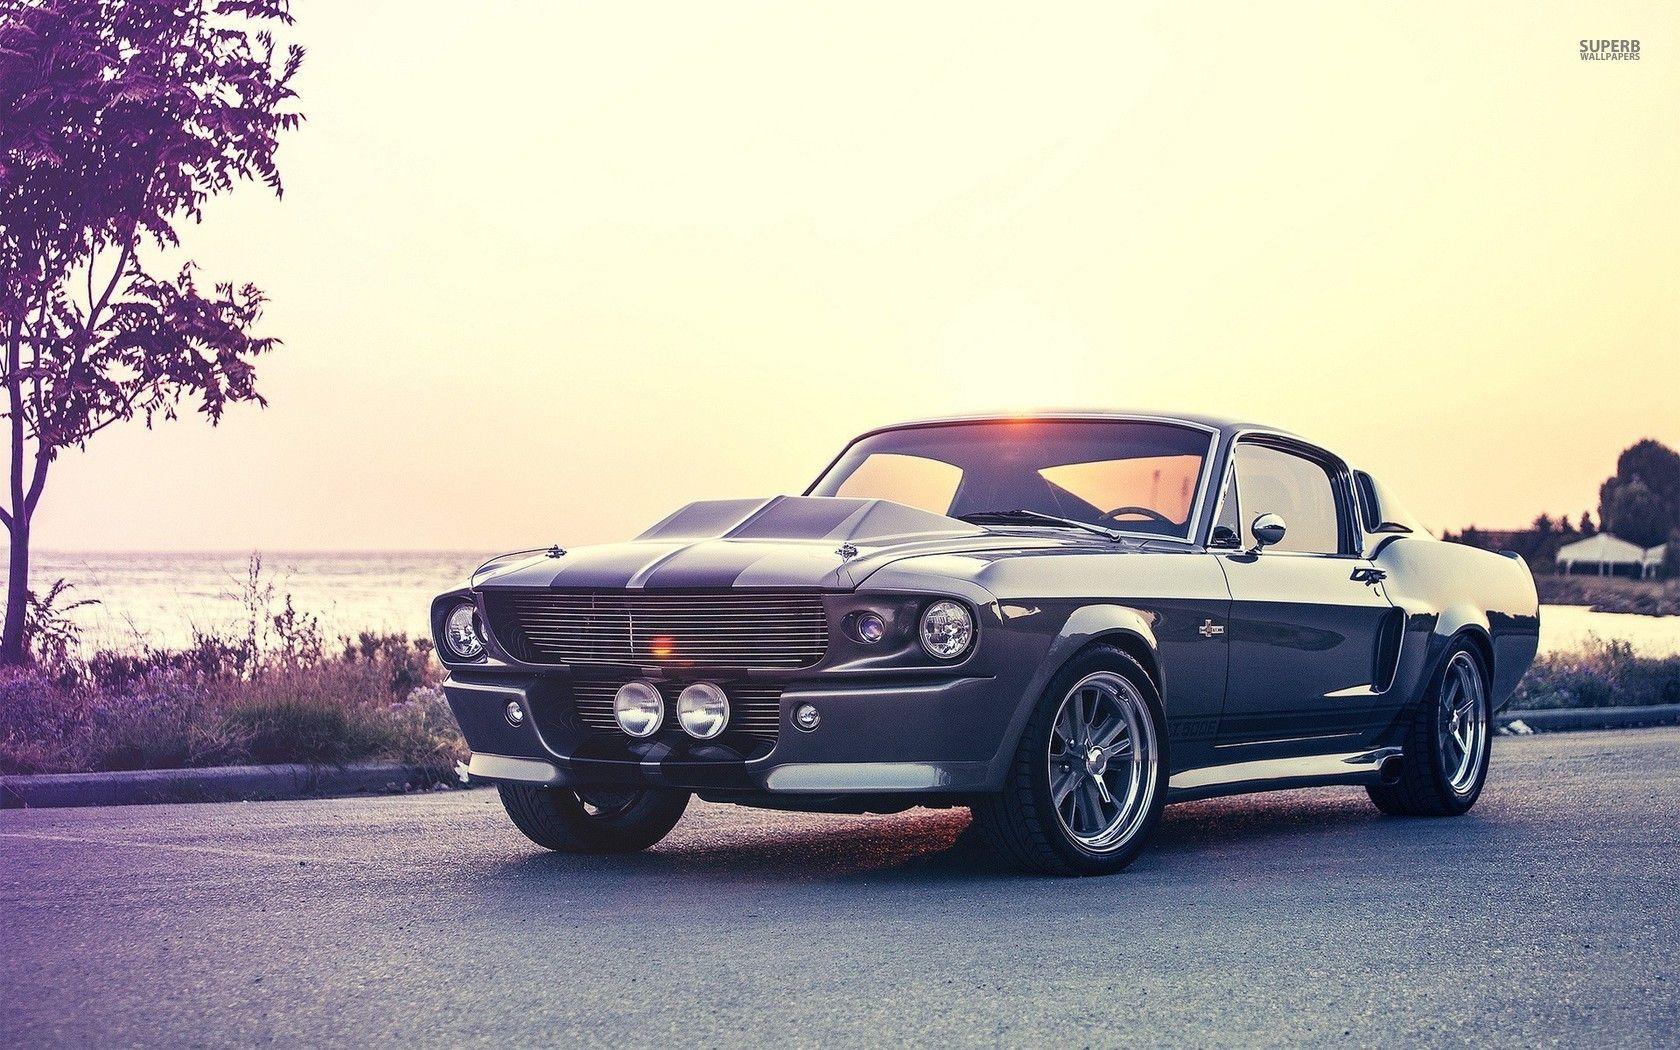 Ford Mustang 1967 HD Wallpaper, Background Image